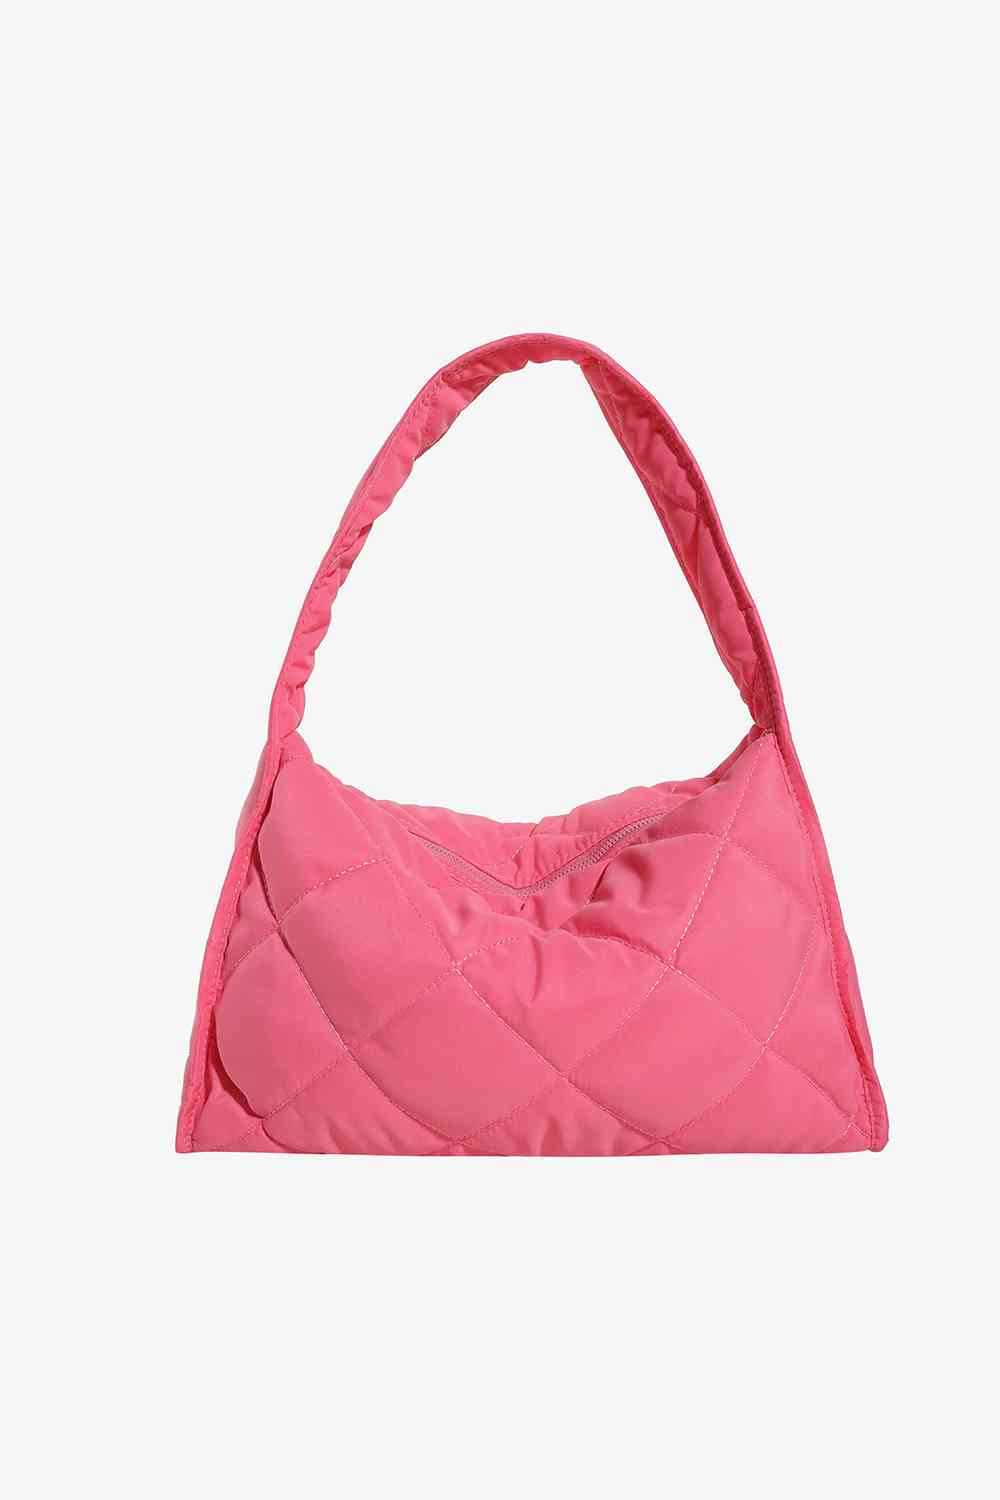 Nylon Shoulder Bag - Hot Pink / One Size - All Products - Handbags - 1 - 2024